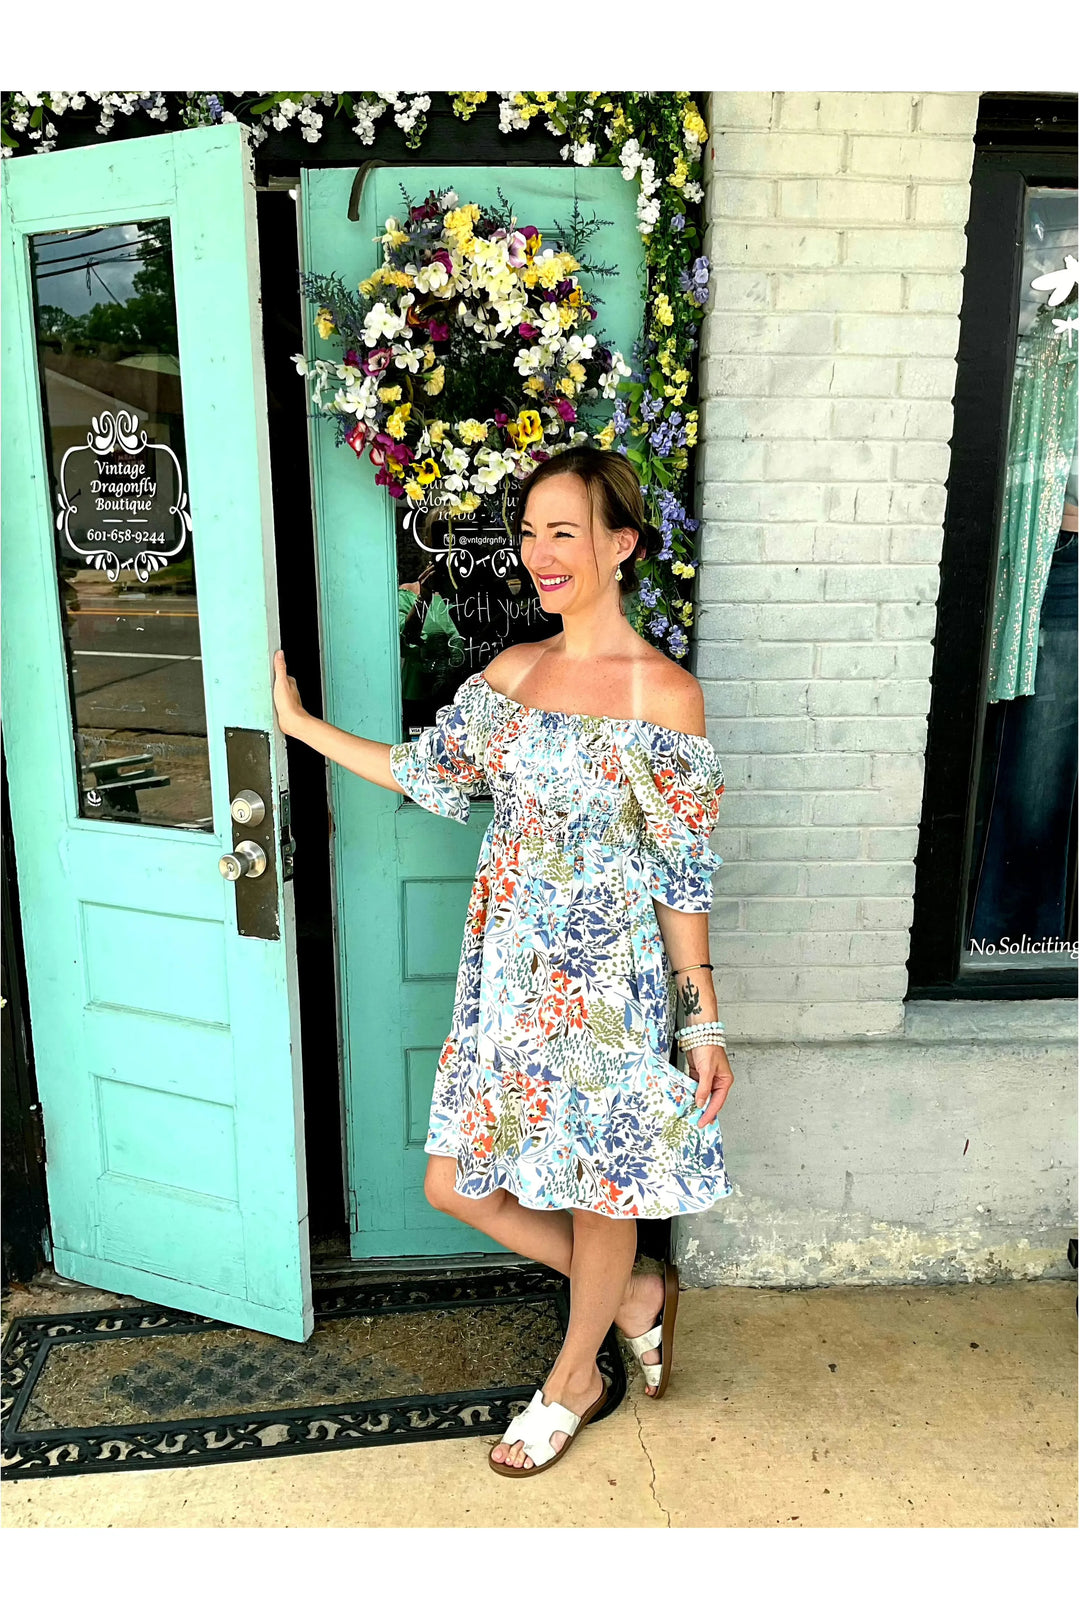 Floral Pattern Smocked Ruffle Babydoll Dress-Dresses-First Love-Vintage Dragonfly-Women’s Fashion Boutique Located in Sumrall, Mississippi